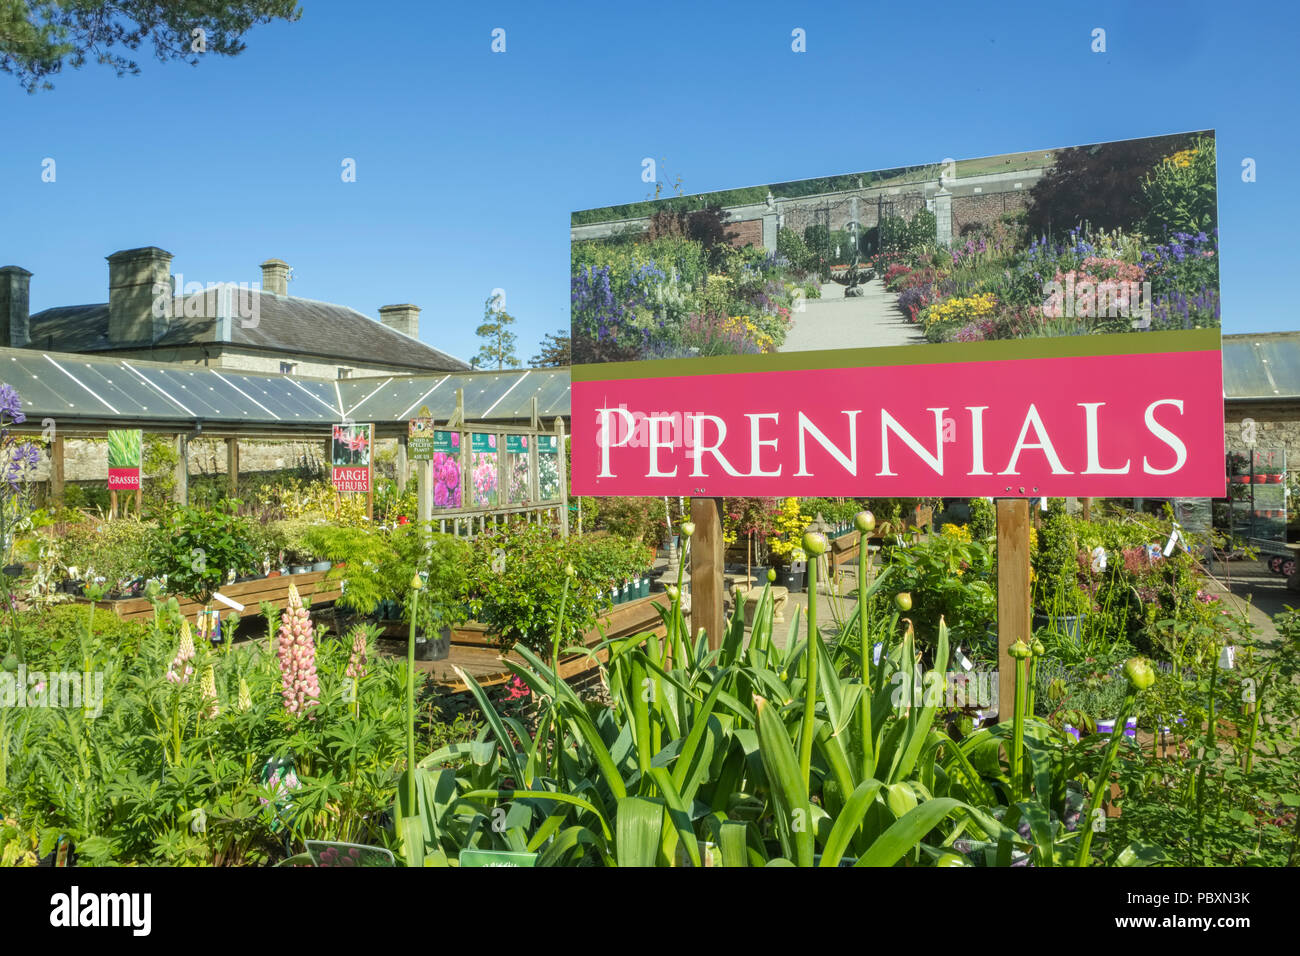 Plants and flowers, perennials, for sale on display outside in a Garden Centre, England, UK, Europe Stock Photo